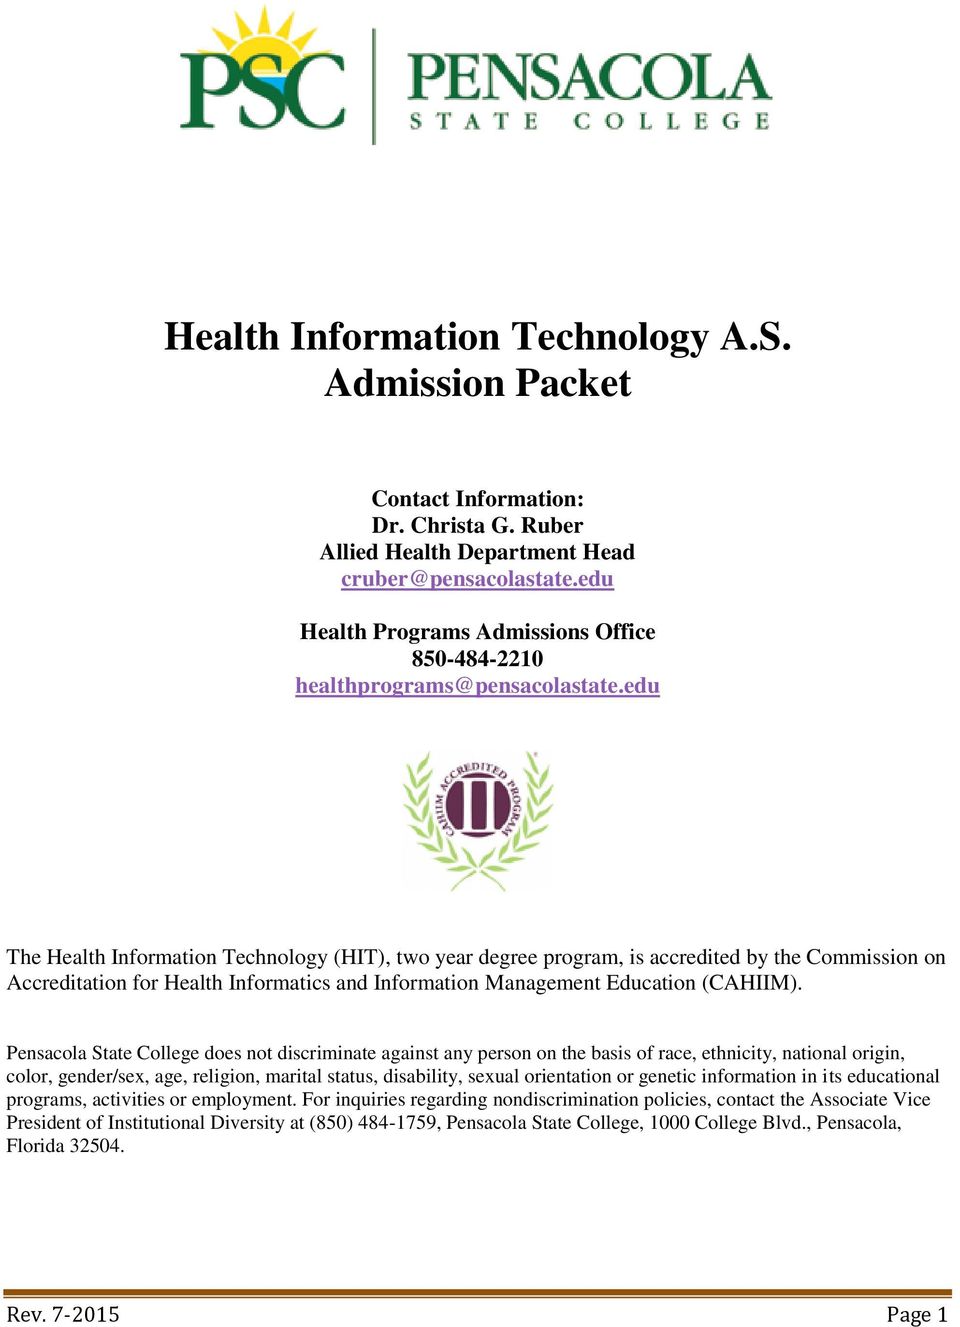 edu The Health Information Technology (HIT), two year degree program, is accredited by the Commission on Accreditation for Health Informatics and Information Management Education (CAHIIM).